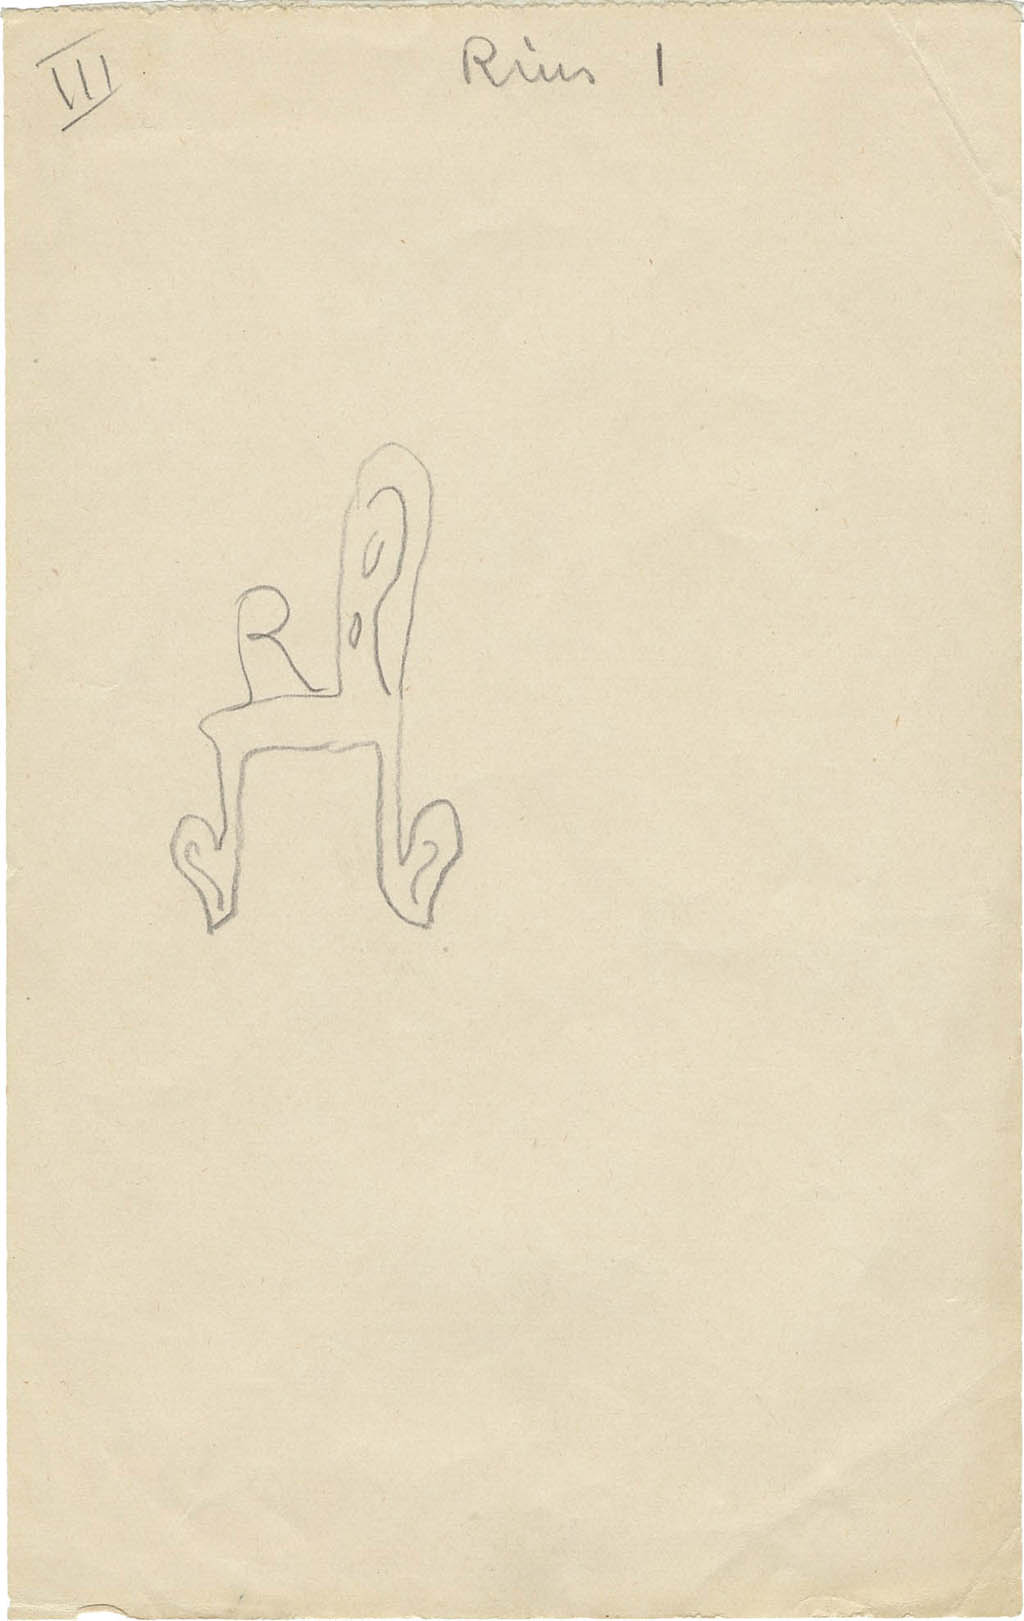 Jeu de Dessin Communique (Game of Communicated Drawing) - Robert Rius - Le Chaise RF (The Armchair RF) - c.1938 pencil and ink on six sheets of paper